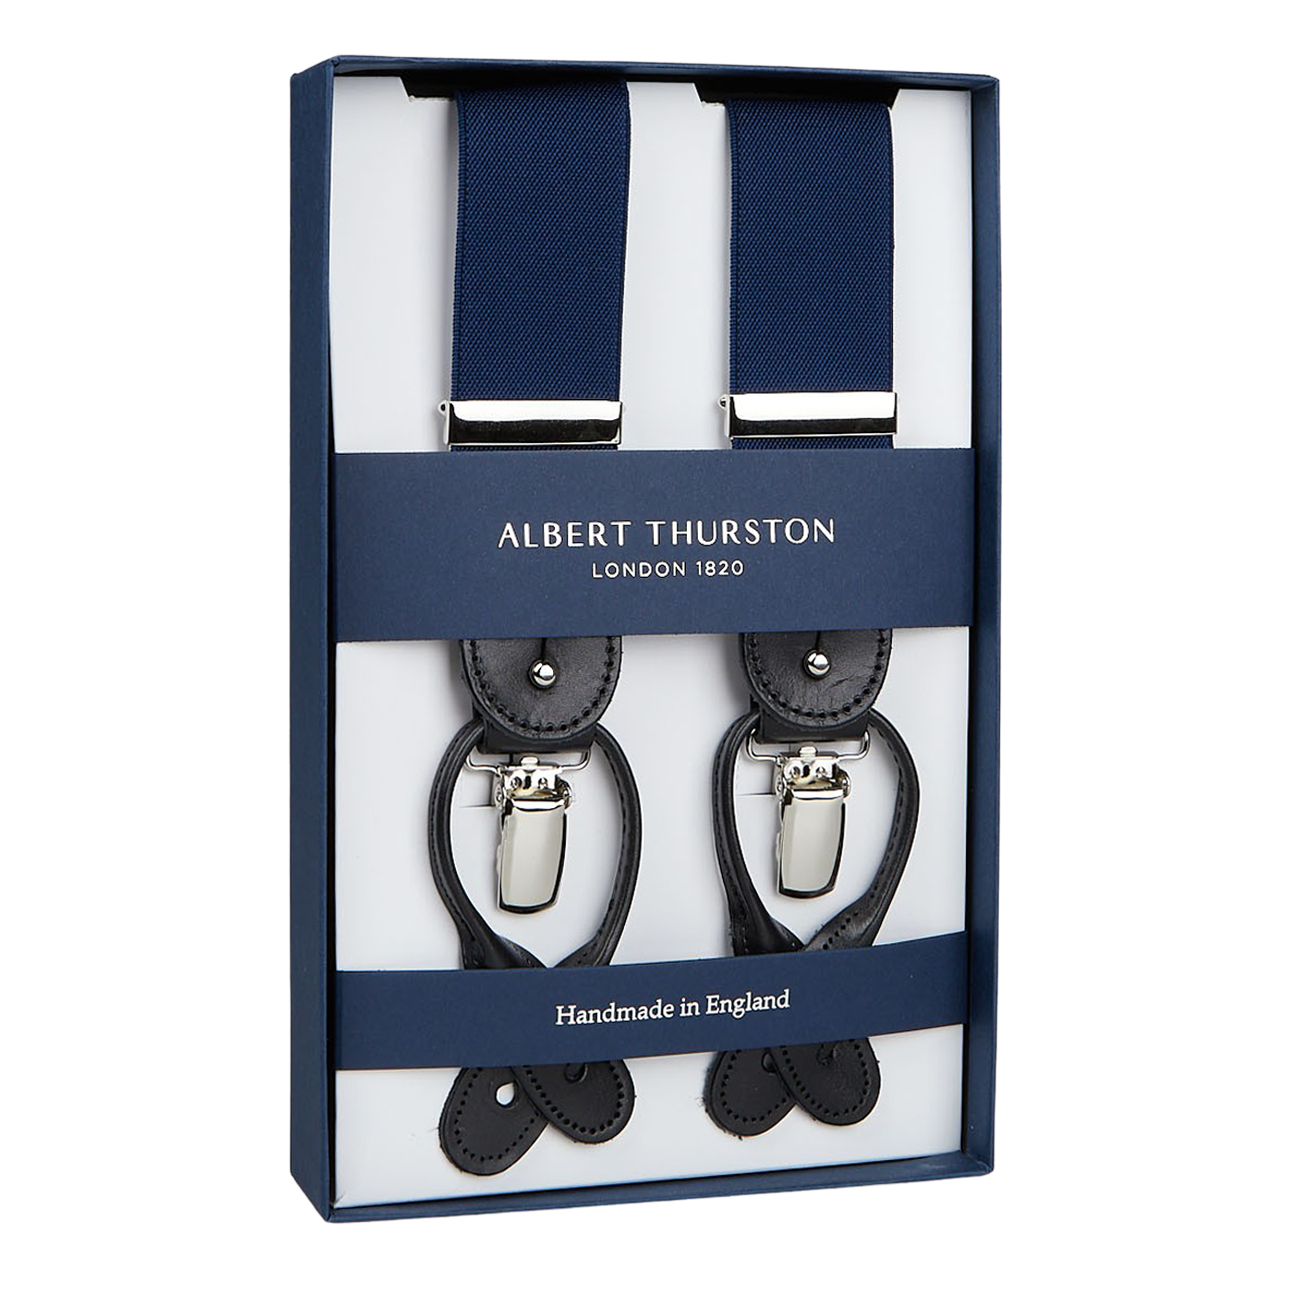 A pair of navy stretchable nylon Albert Thurston braces displayed in a box, indicating they are handmade in England.